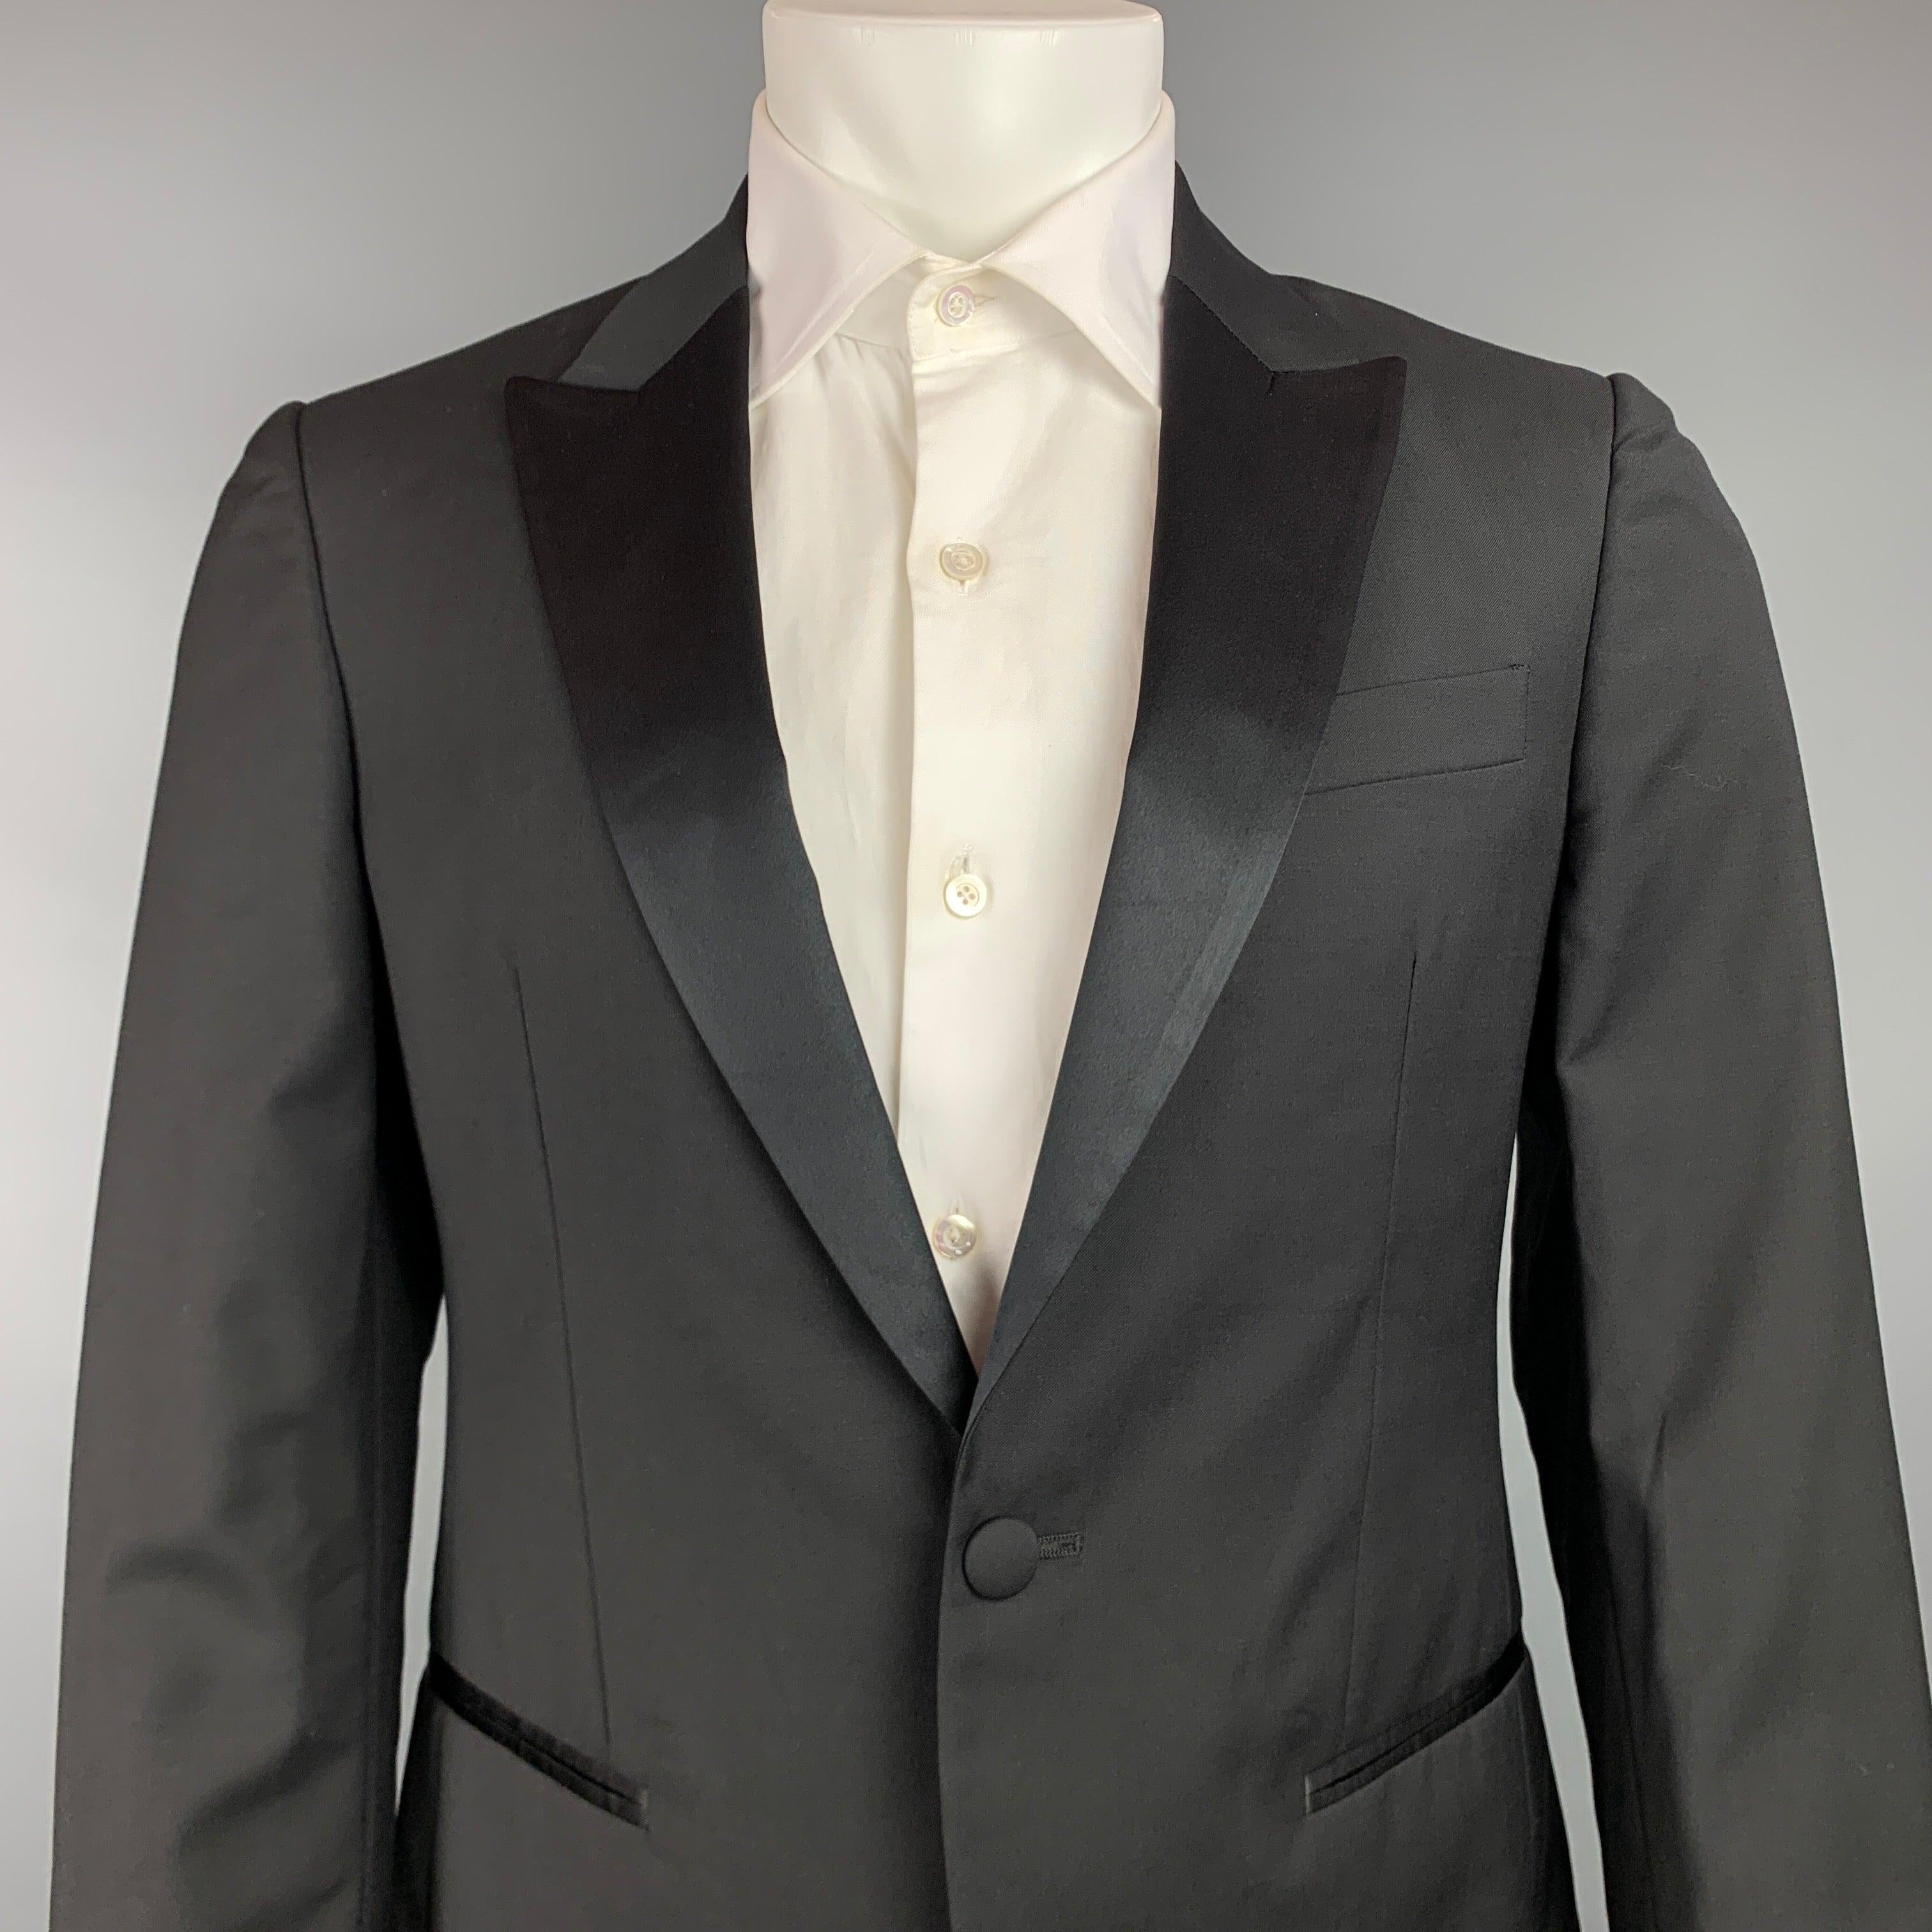 JOHN VARVATOS sport coat comes in a black wool / mohair with a full liner featuring a peak lapel, slit pockets, and a single button closure. Made in Italy.Very Good
Pre-Owned Condition. 

Marked:   48 

Measurements: 
 
Shoulder: 17.5 inches  Chest: